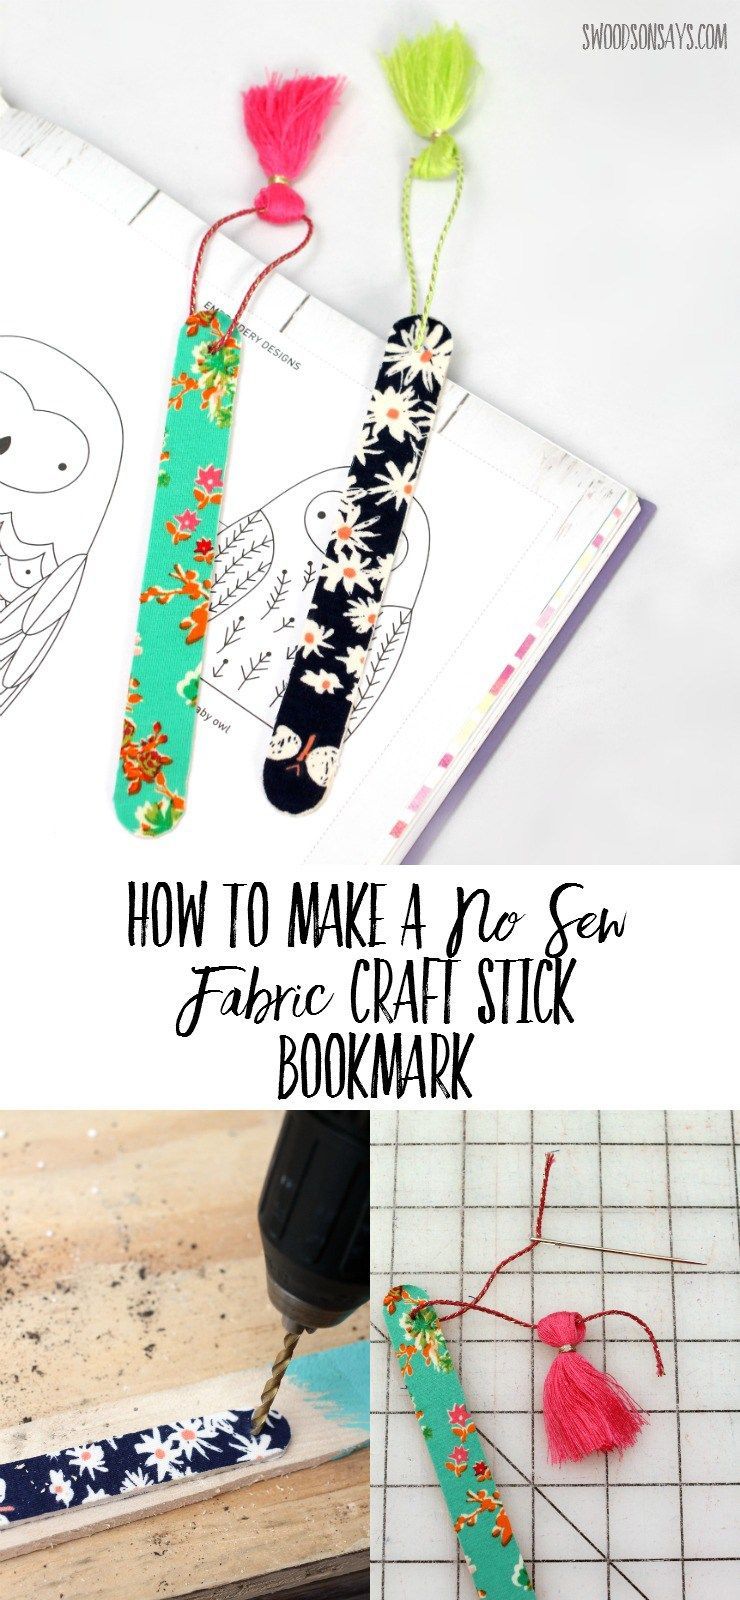 How To Make A No Sew Fabric Bookmark -   24 popsicle stick bookmarks
 ideas